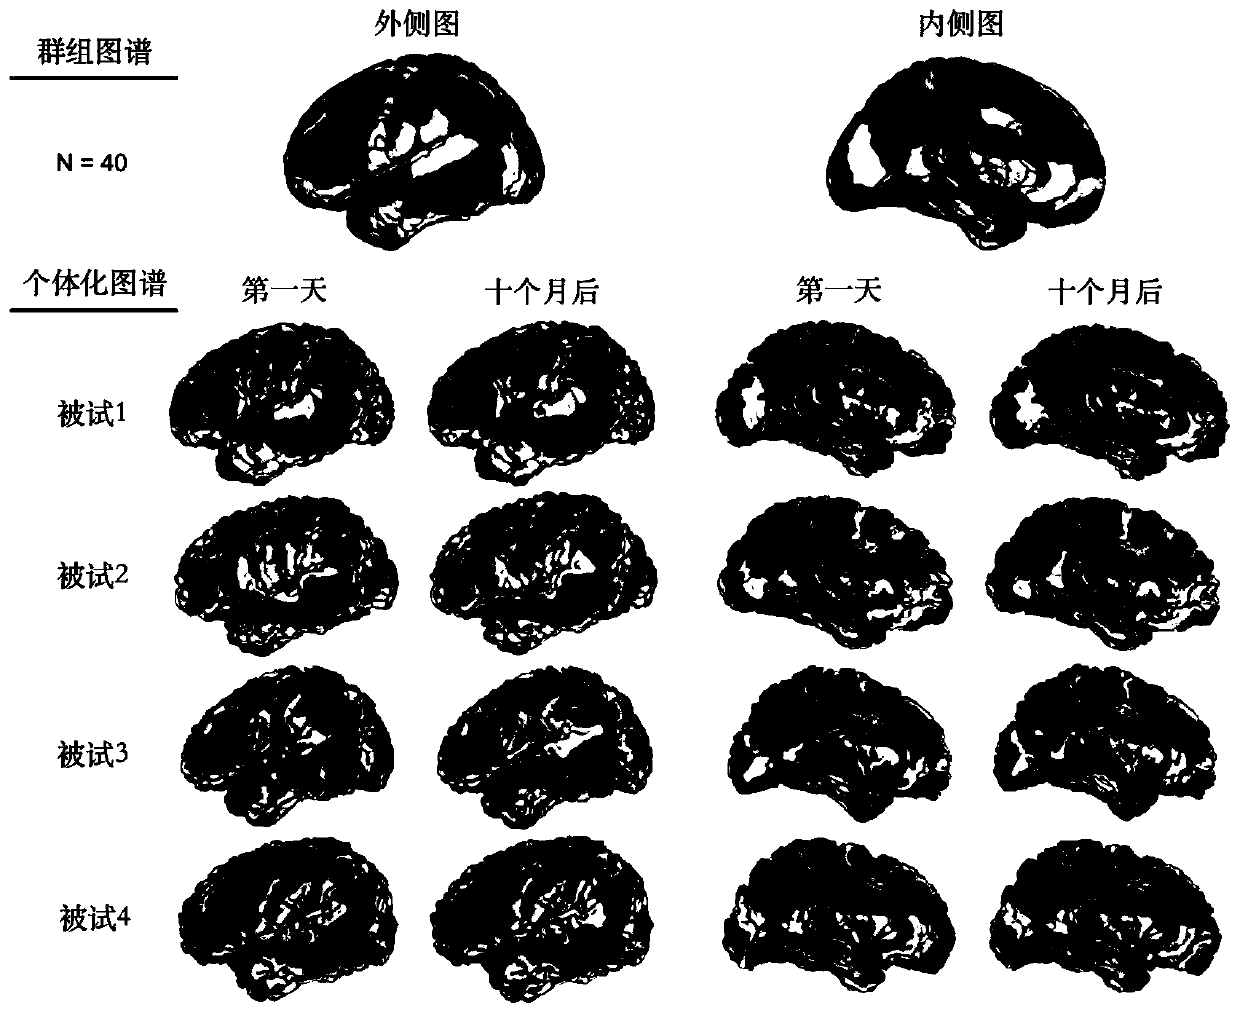 Individualized structure connection brain atlas drawing method based on diffusion magnetic resonance imaging fiber bundle tracking technology